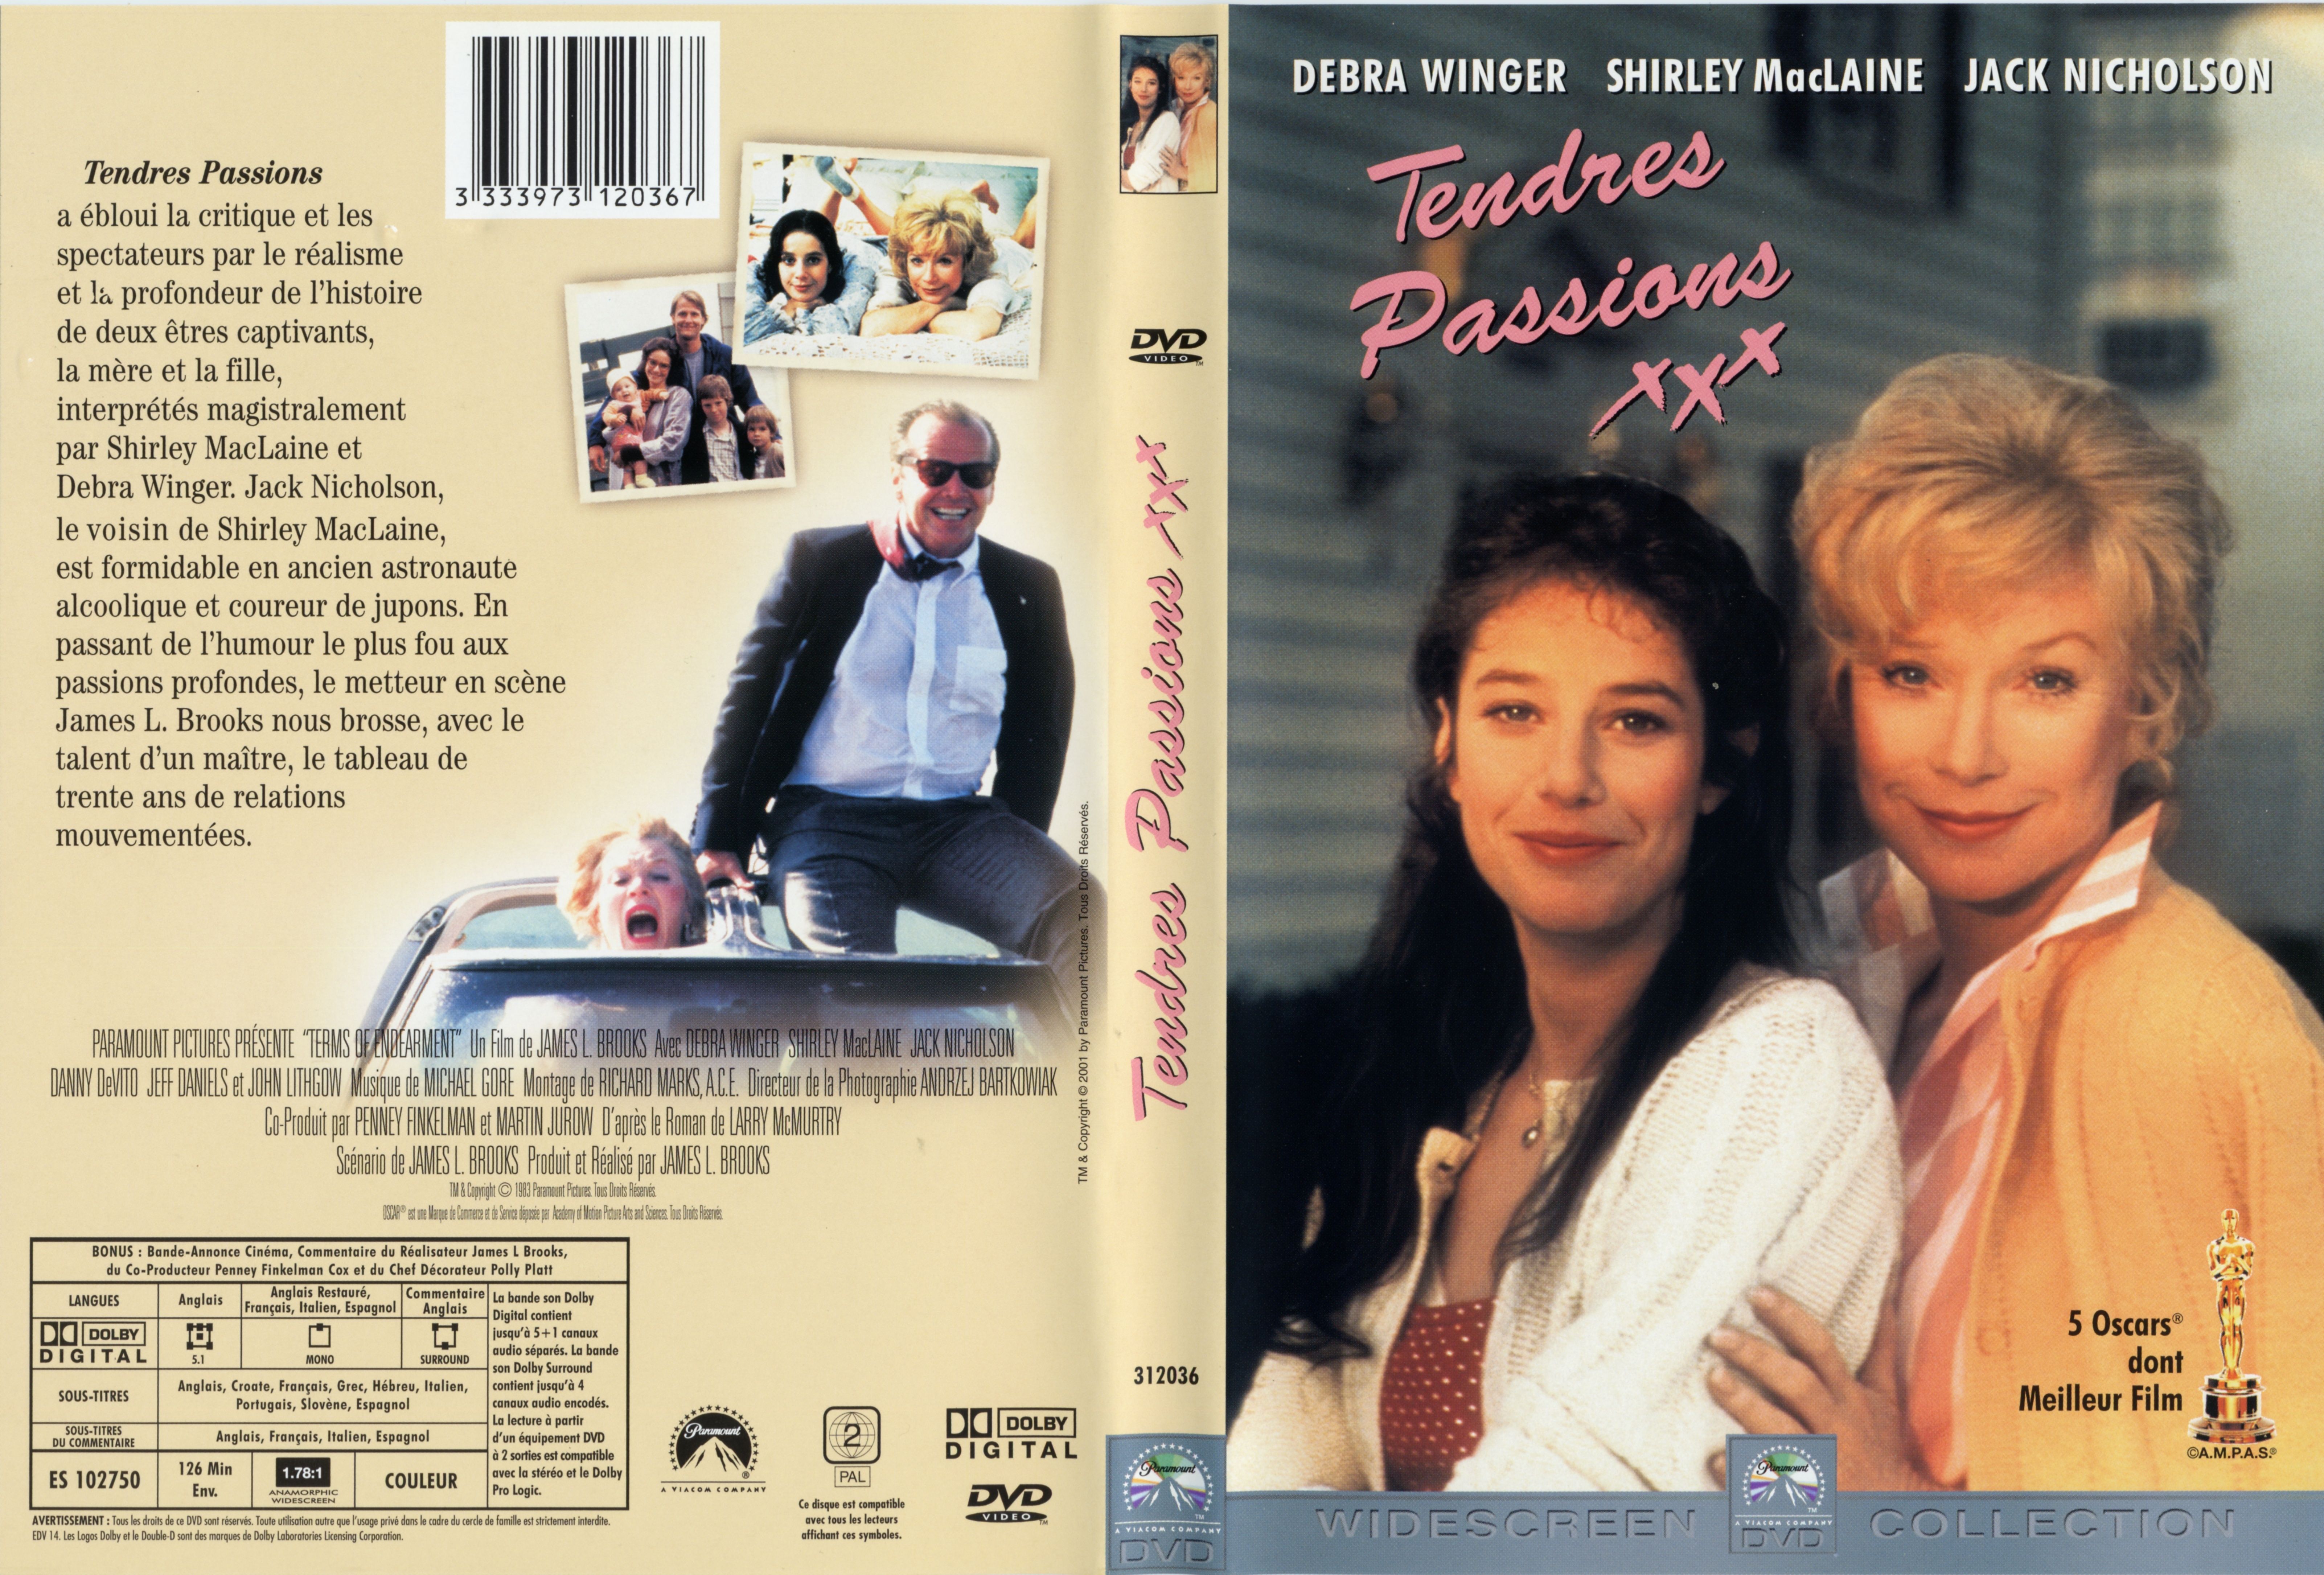 Jaquette DVD Tendres passions